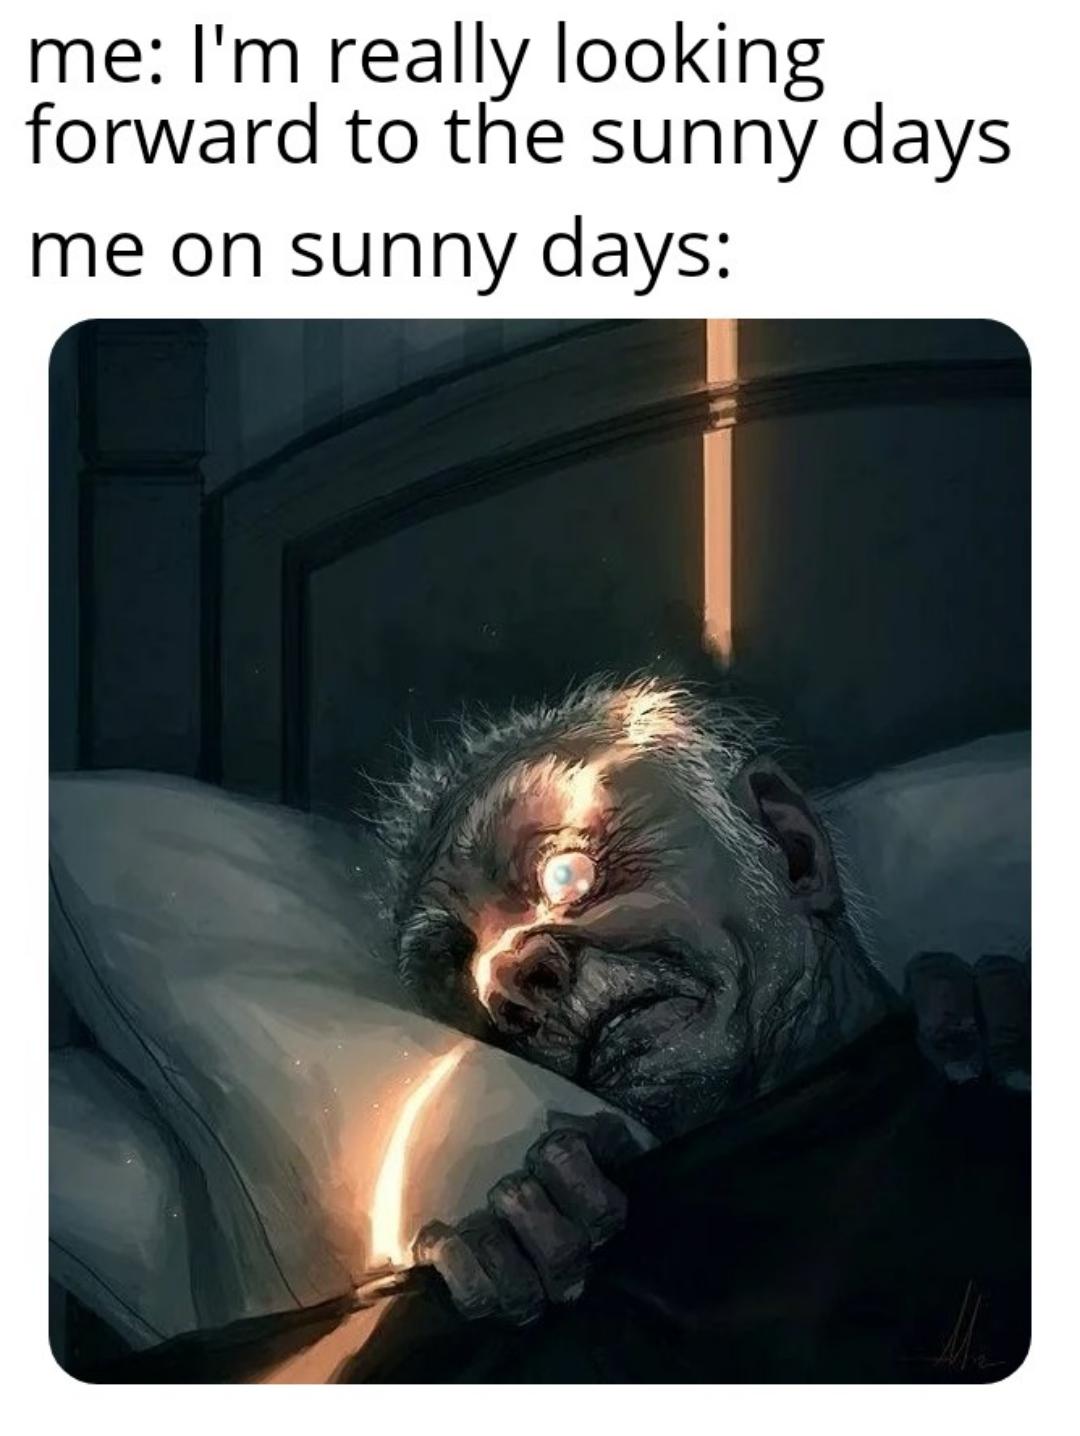 dank memes - funny memes - tell tale heart art - me I'm really looking forward to the sunny days me on sunny days